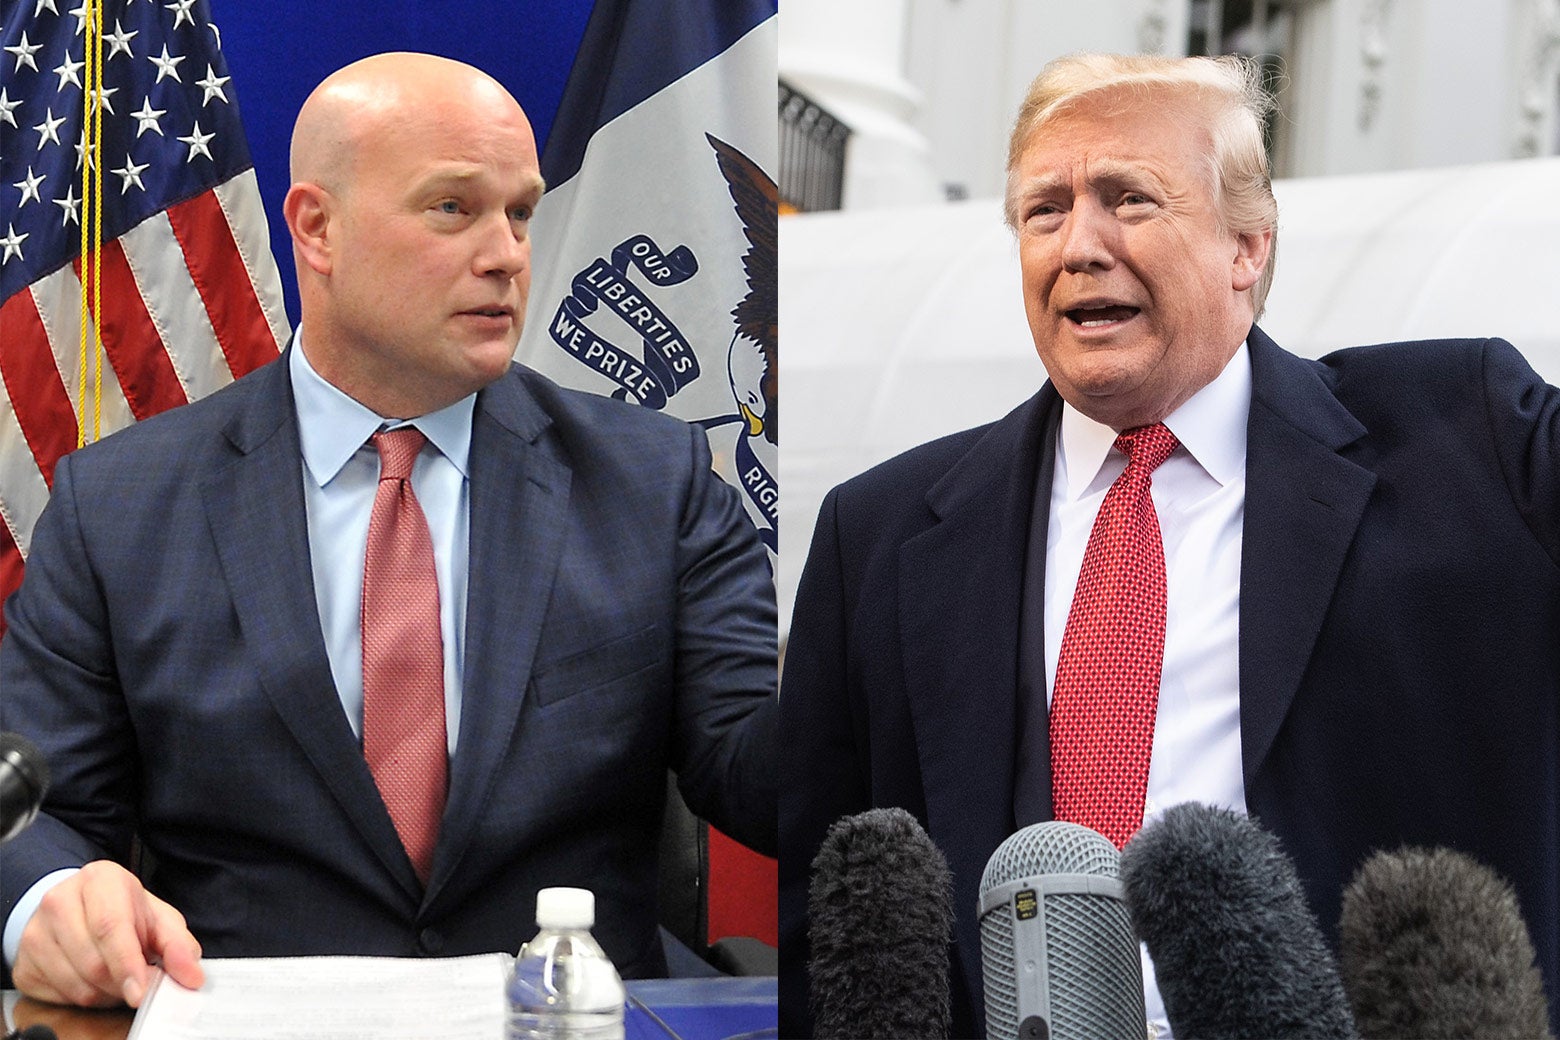 Side-by-side images of Matthew Whitaker and President Donald Trump.